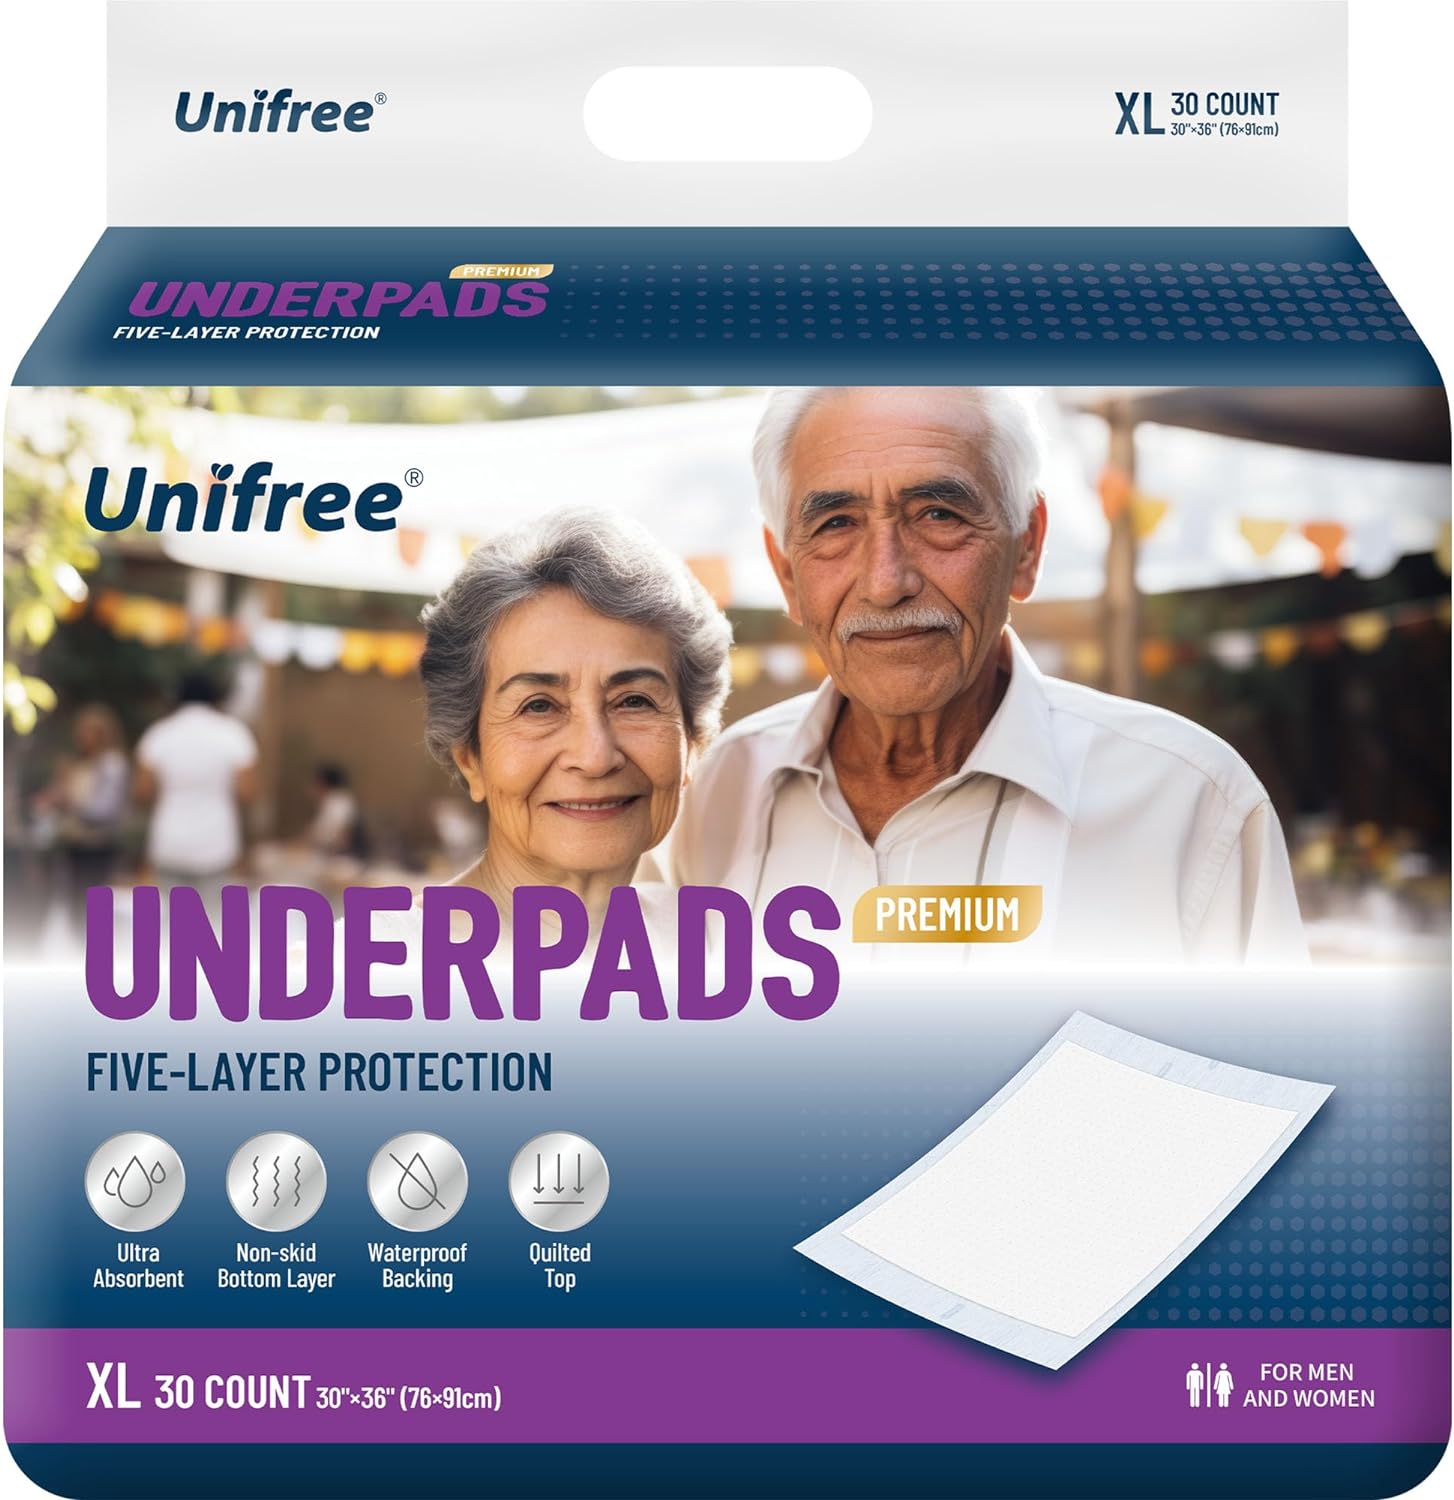 Unifree Premium Disposable Underpads, Bed Pads,Incontinence Pads, Anti-Slip Back, Super AbsorbentChux Pads, Heavy Duty, 30 Count (XL 30×36 Inch)